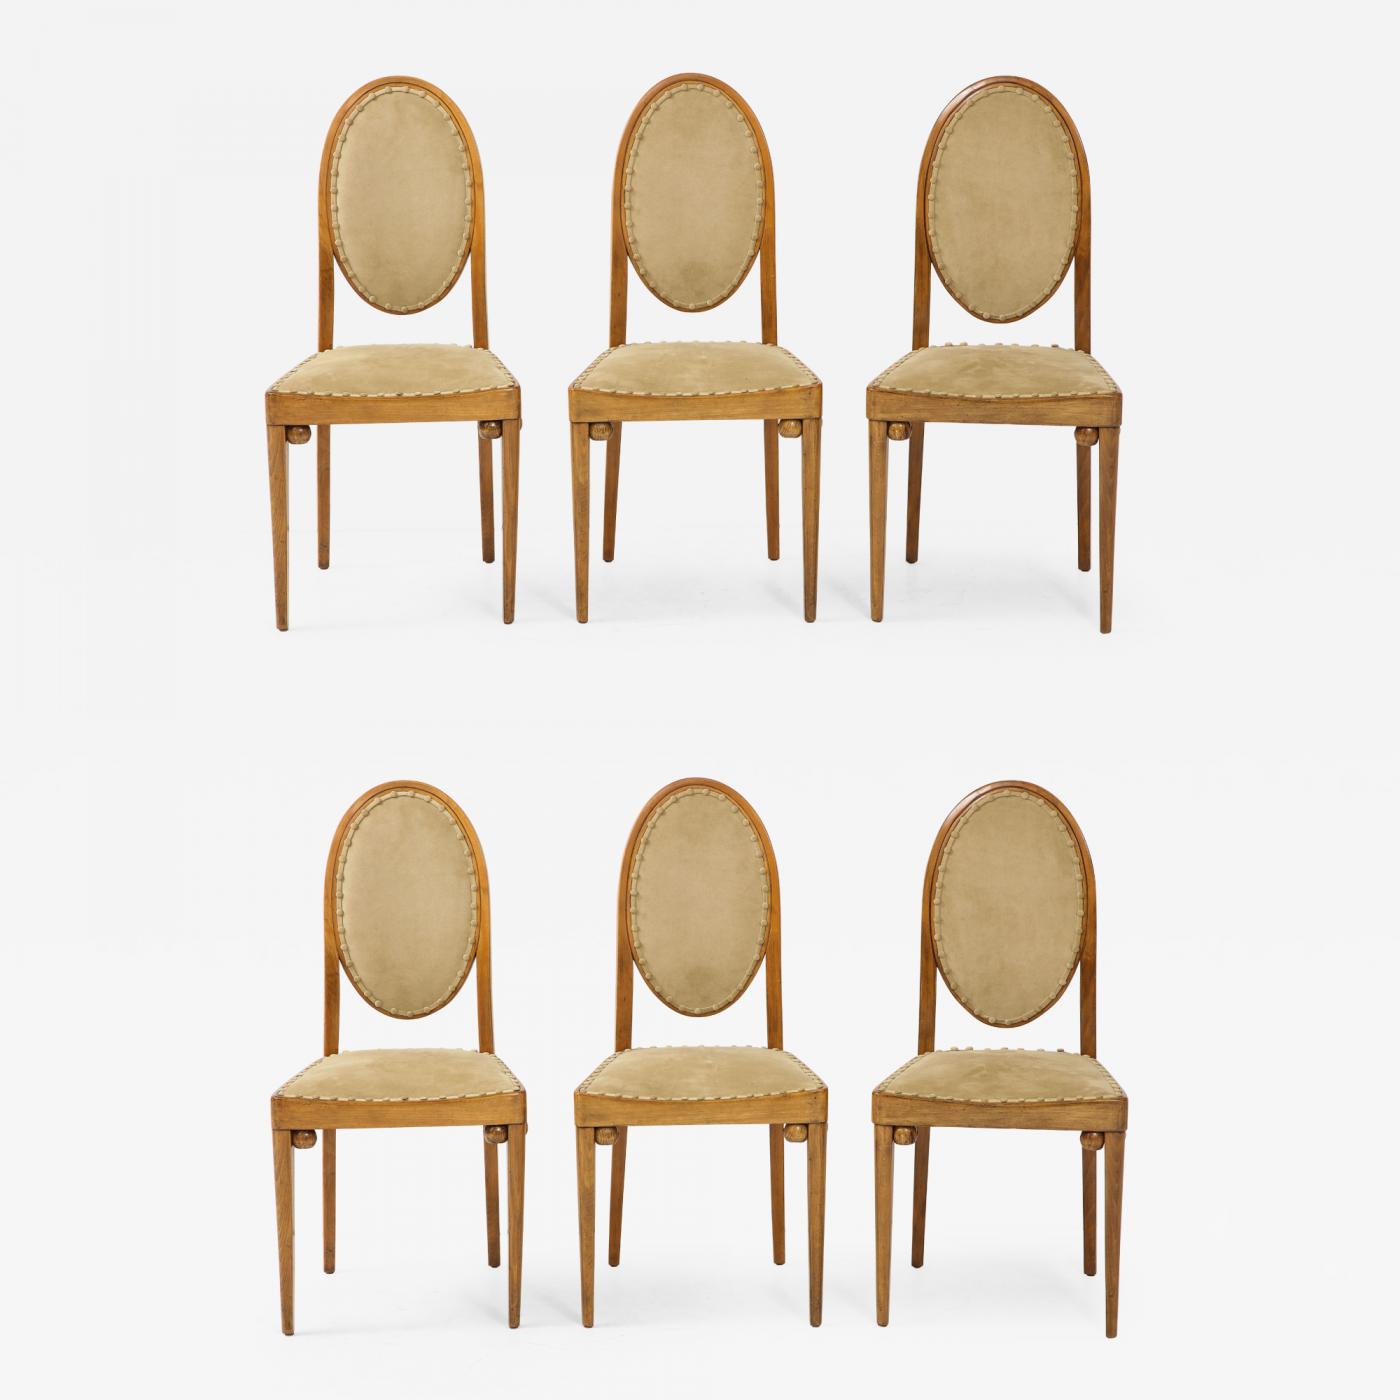 Louis Dining Chair with Arms - NYDC